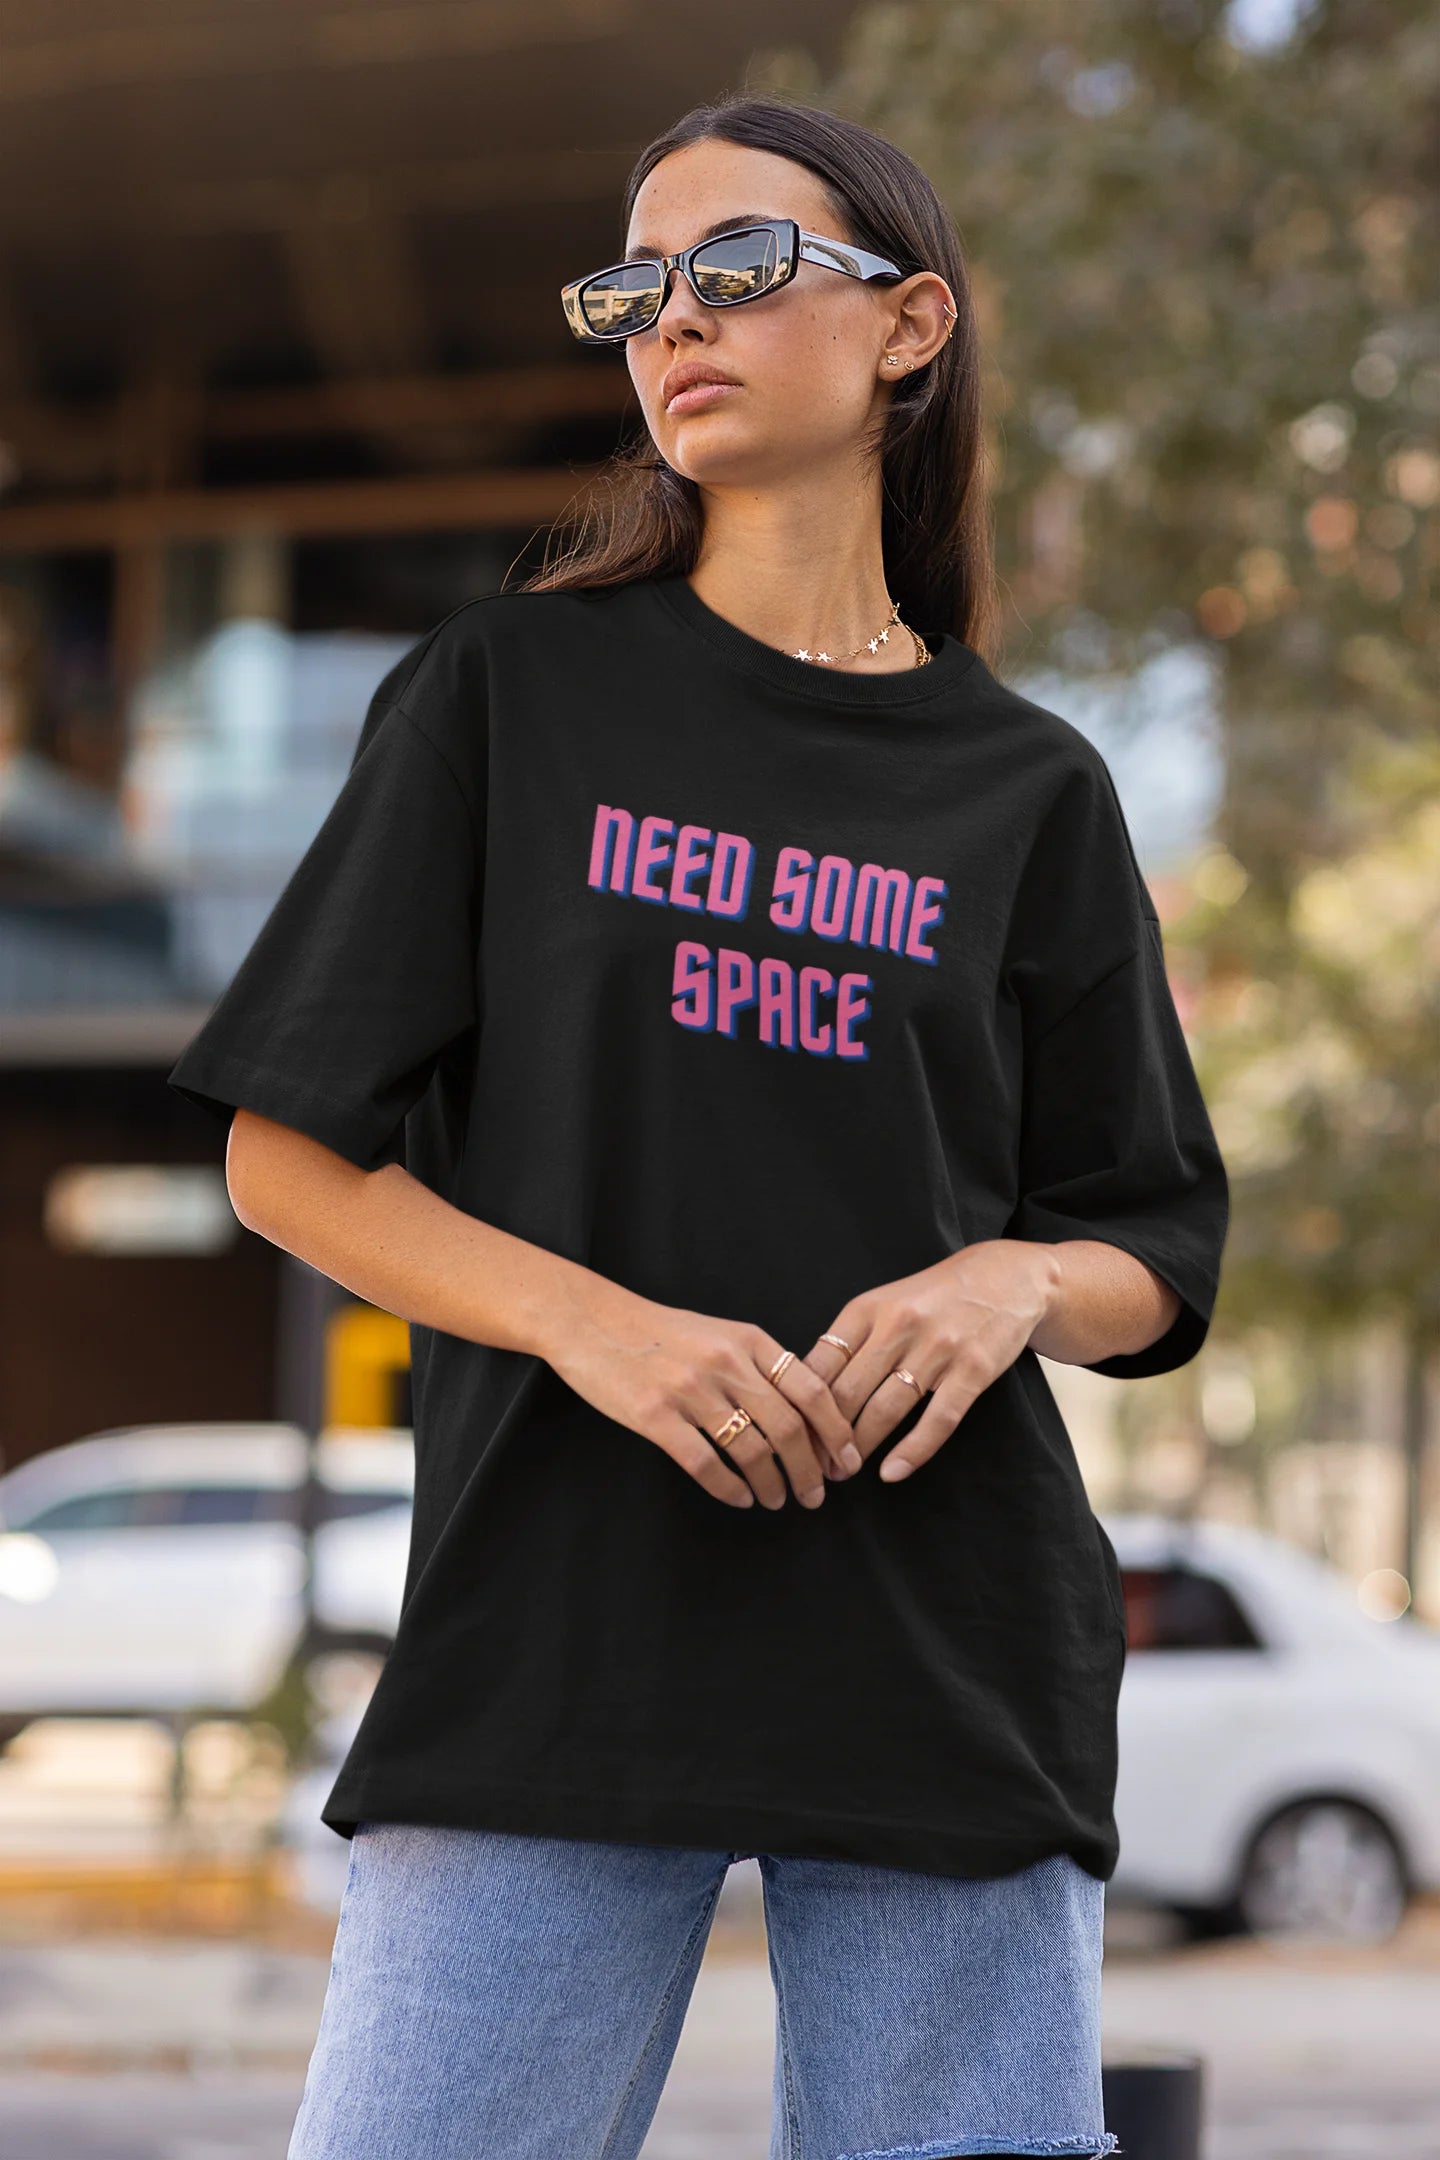 Spaced Out | Space Vogue | Premium Oversized Half Sleeve Unisex T-Shirt